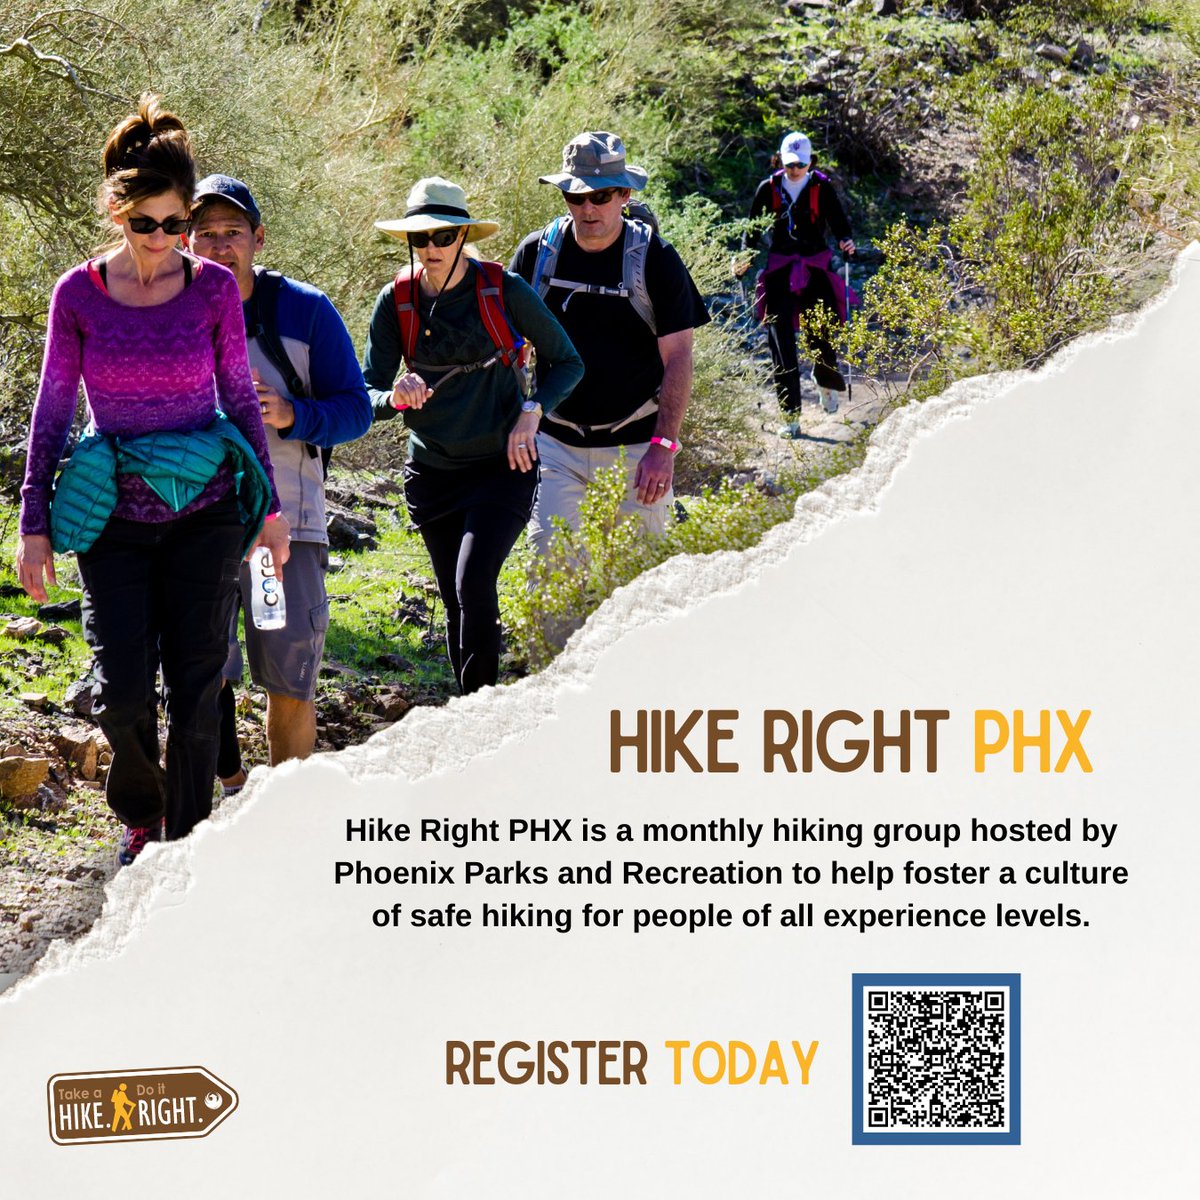 Attention, fellow nature lovers! 🌵🥾☀️ Been searching for a group to explore Phoenix's parks and preserves safely with? Join our community hikes, led by experienced Park Rangers with Hike Right PHX. Register online: phoenix.gov/parks/hikeright #phxparks #hikerightphx